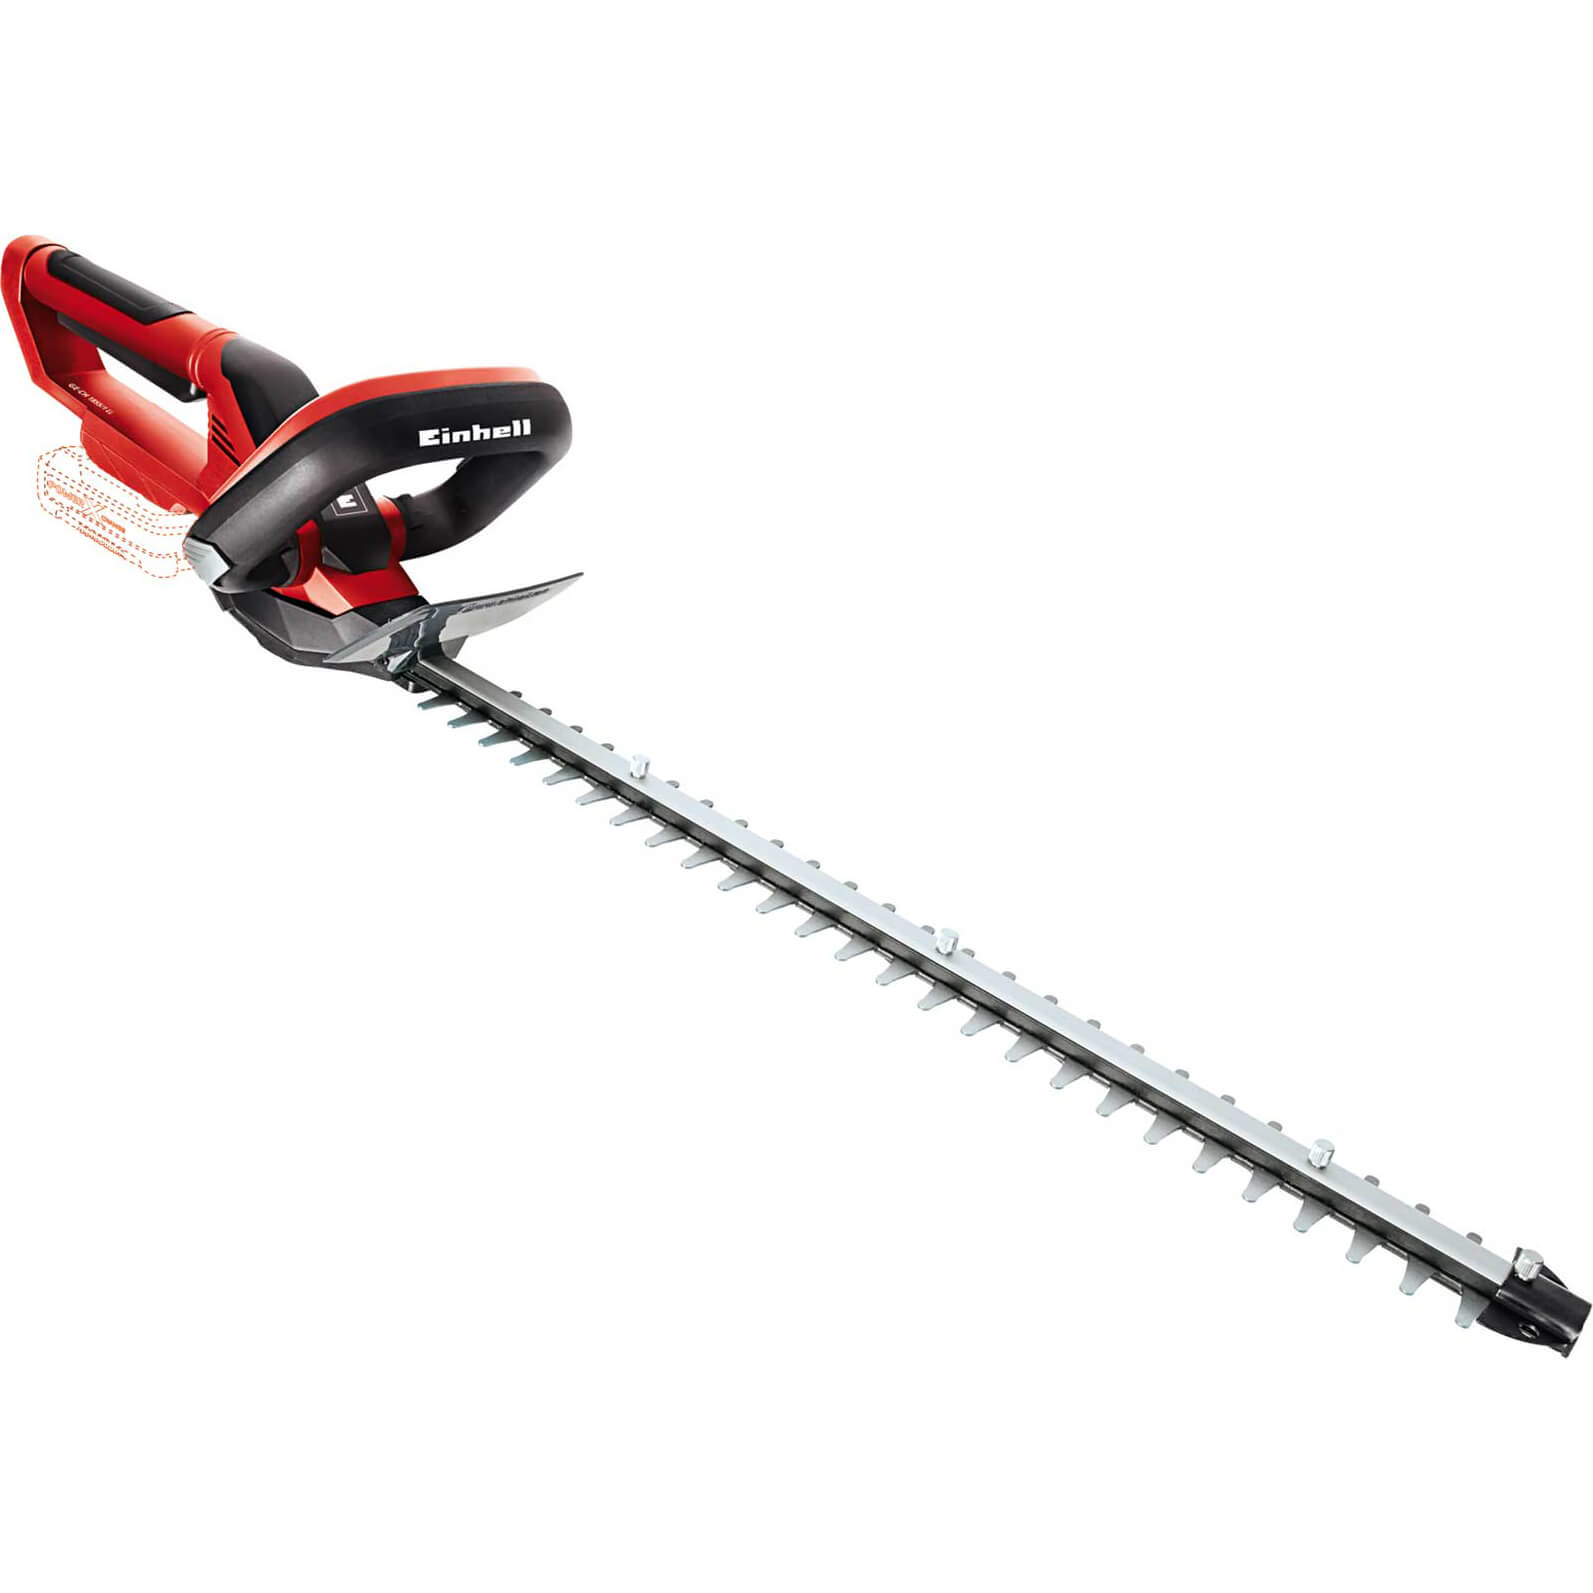 Einhell GE-CH 1855/1 18v Cordless Hedge Trimmer 550mm No Batteries No Charger